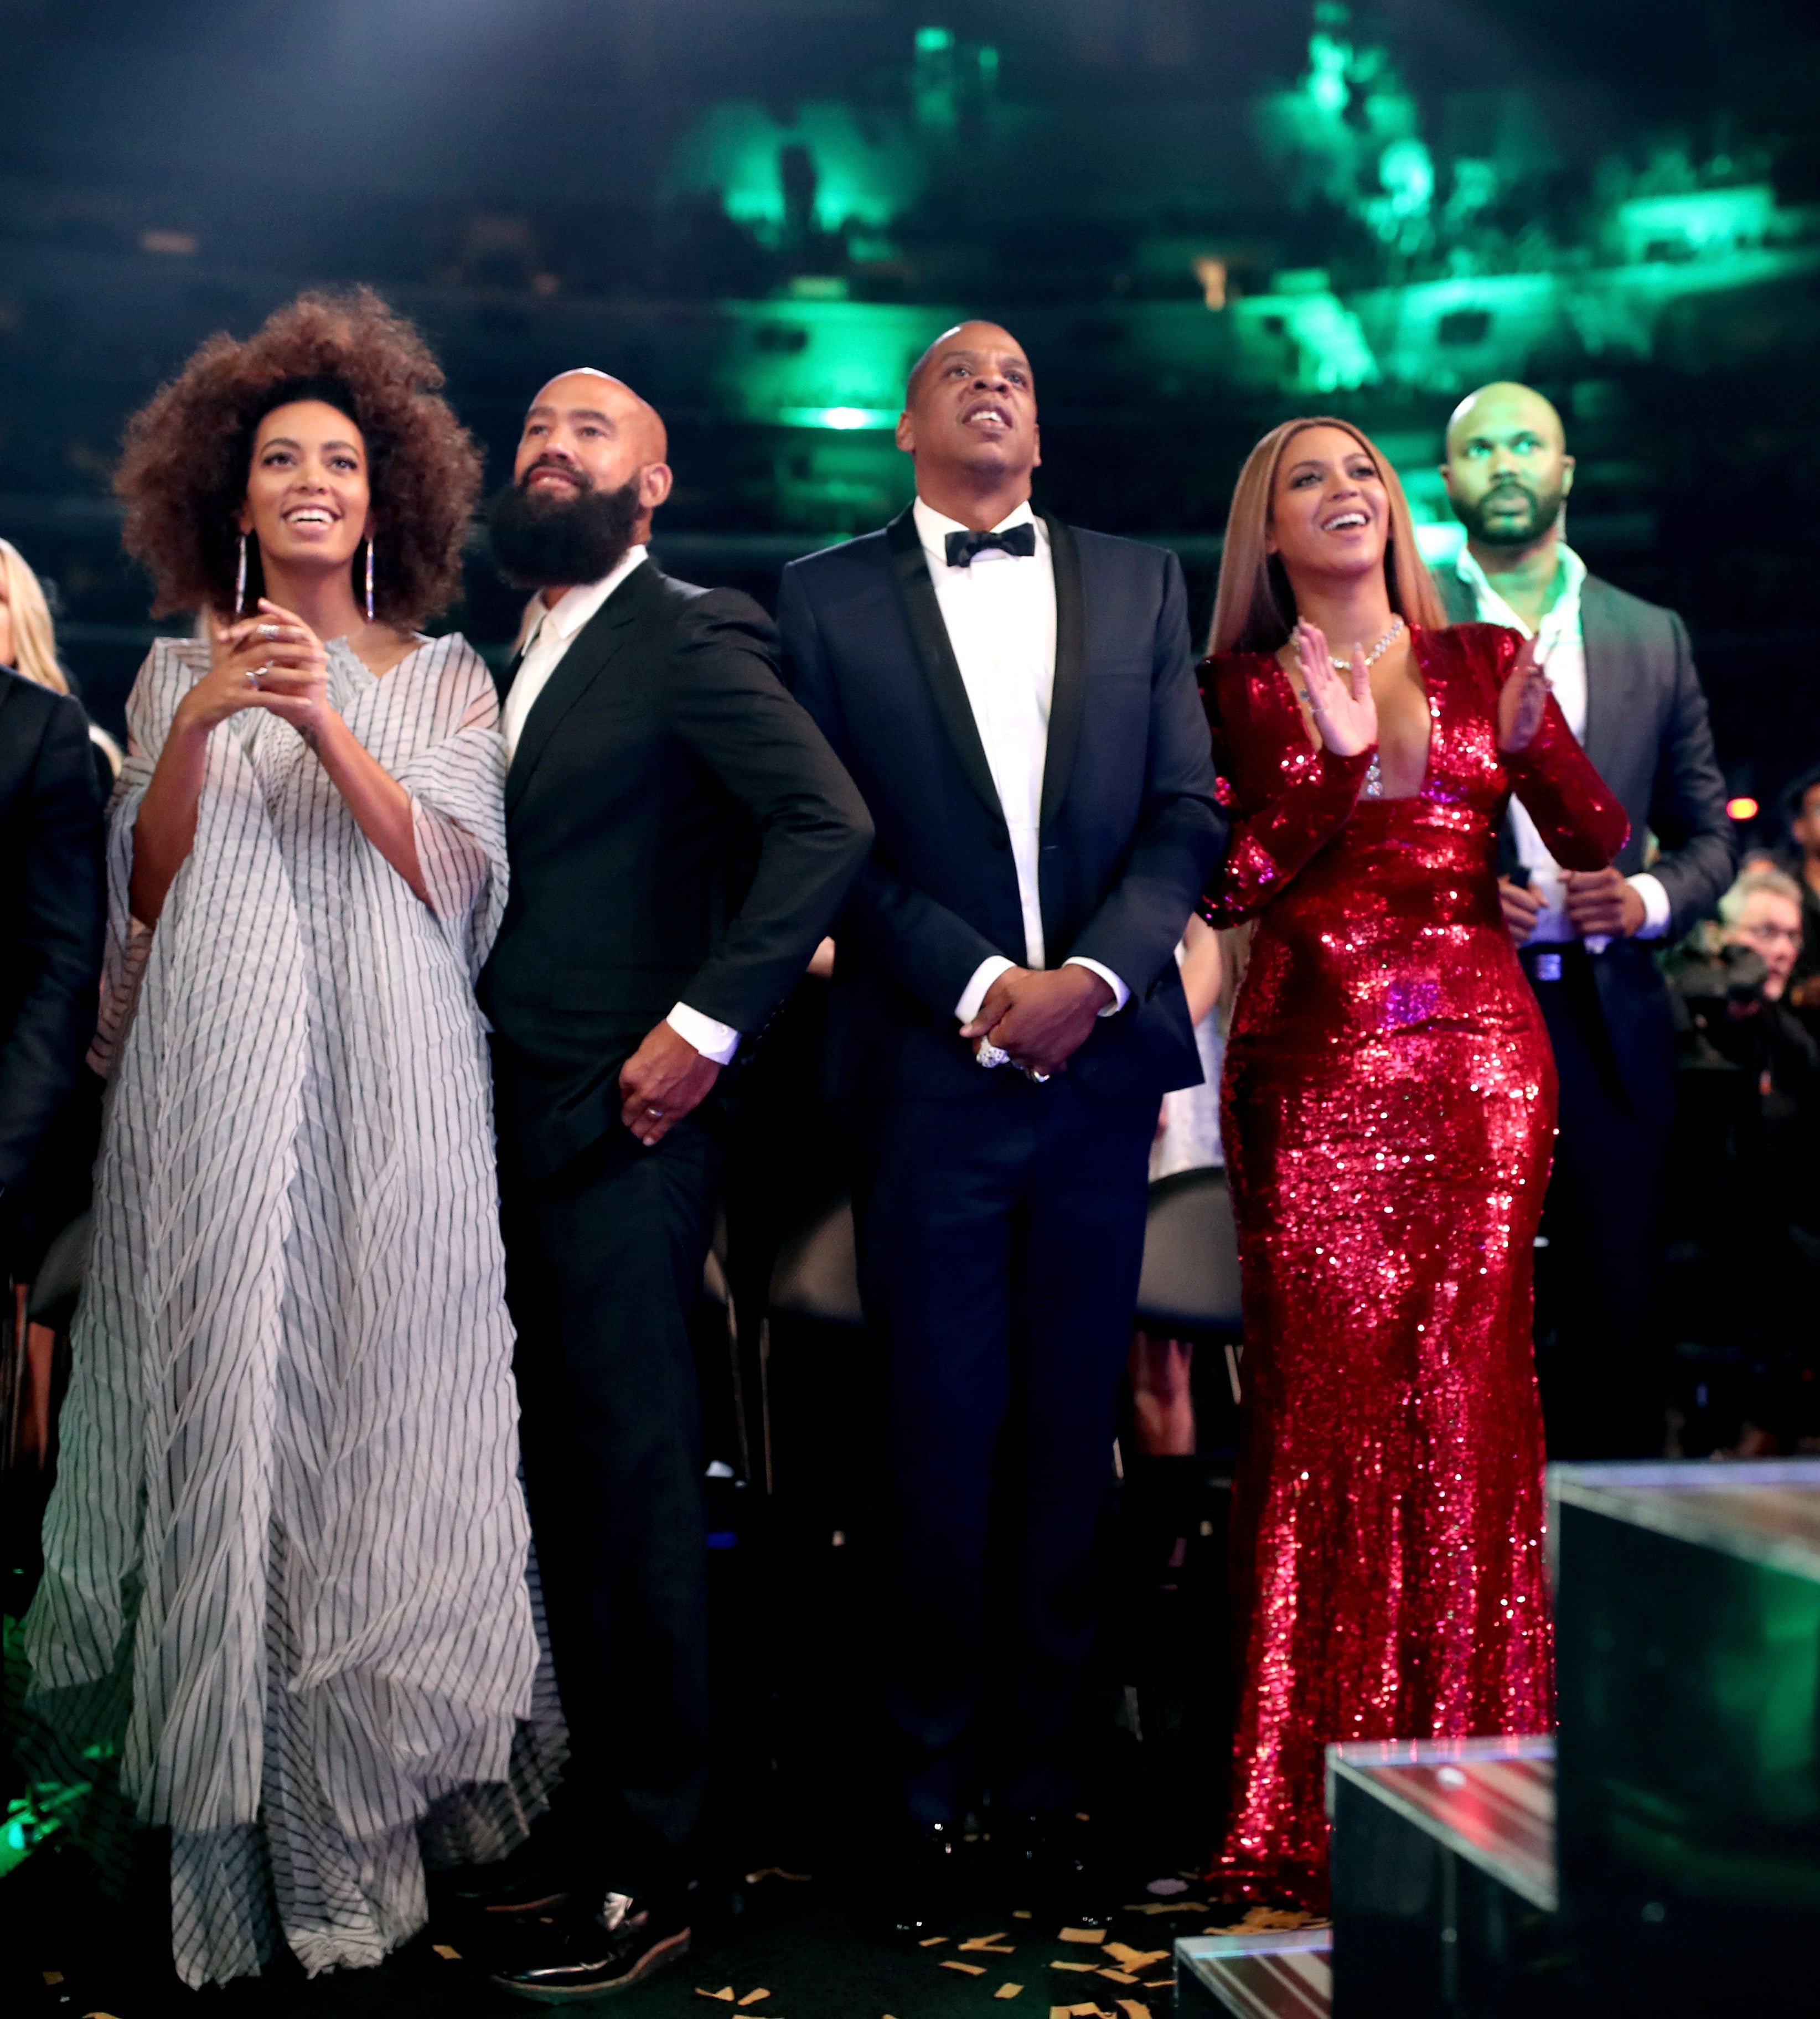 Beyoncé and Solange Exude Pure Joy As They Celebrate Their Big Grammy Wins With Their Husbands
